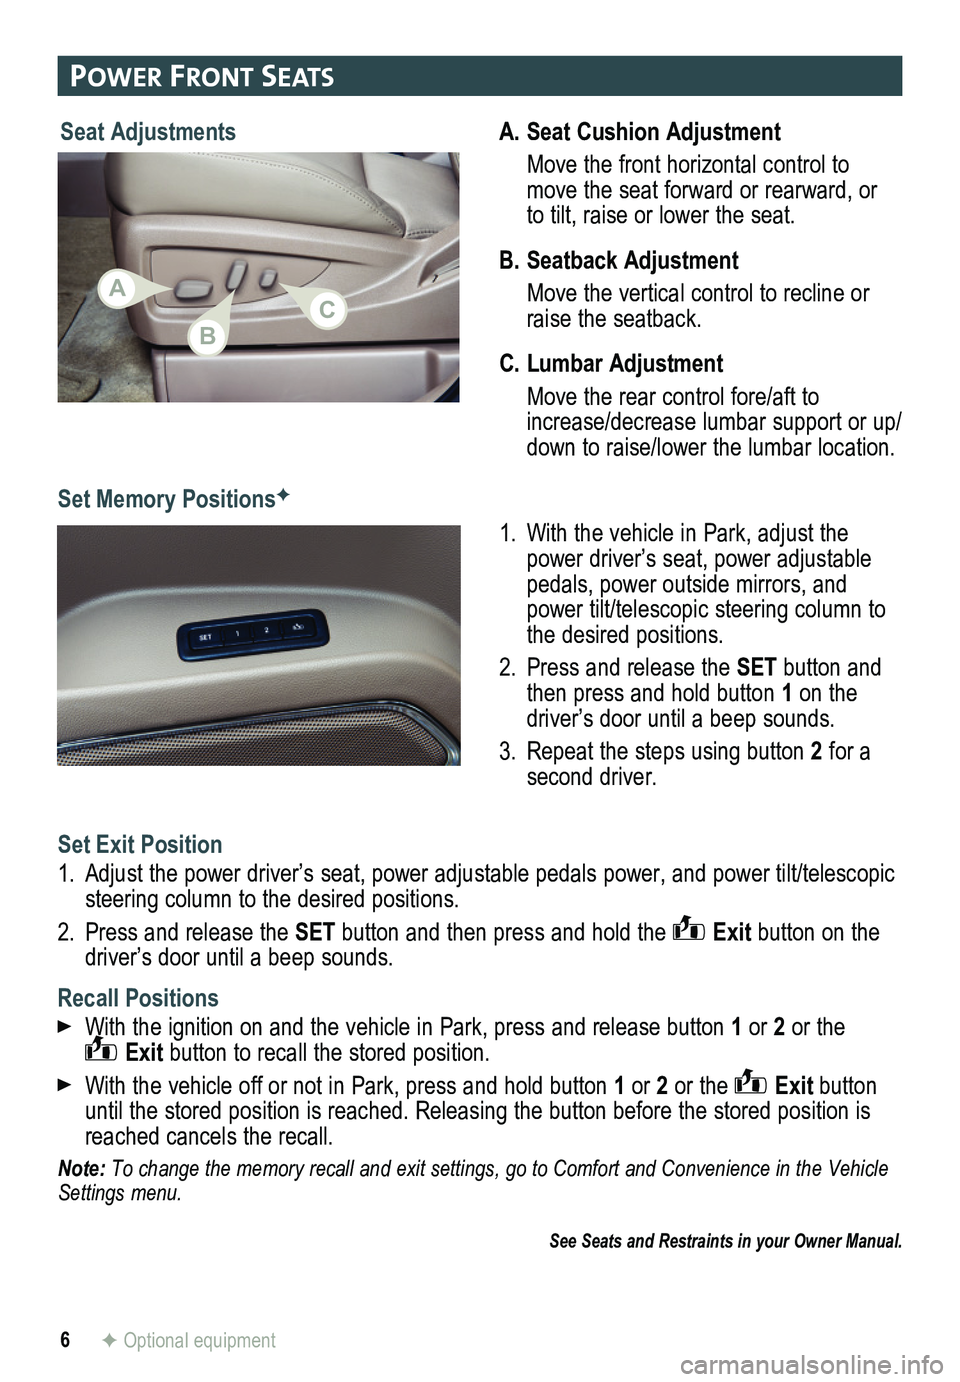 GMC YUKON 2015  Get To Know Guide 6
A. Seat Cushion Adjustment
 Move the front horizontal control to move the seat forward or rearward, or to tilt, raise or lower the seat.
B. Seatback Adjustment
 Move the vertical control to recline 